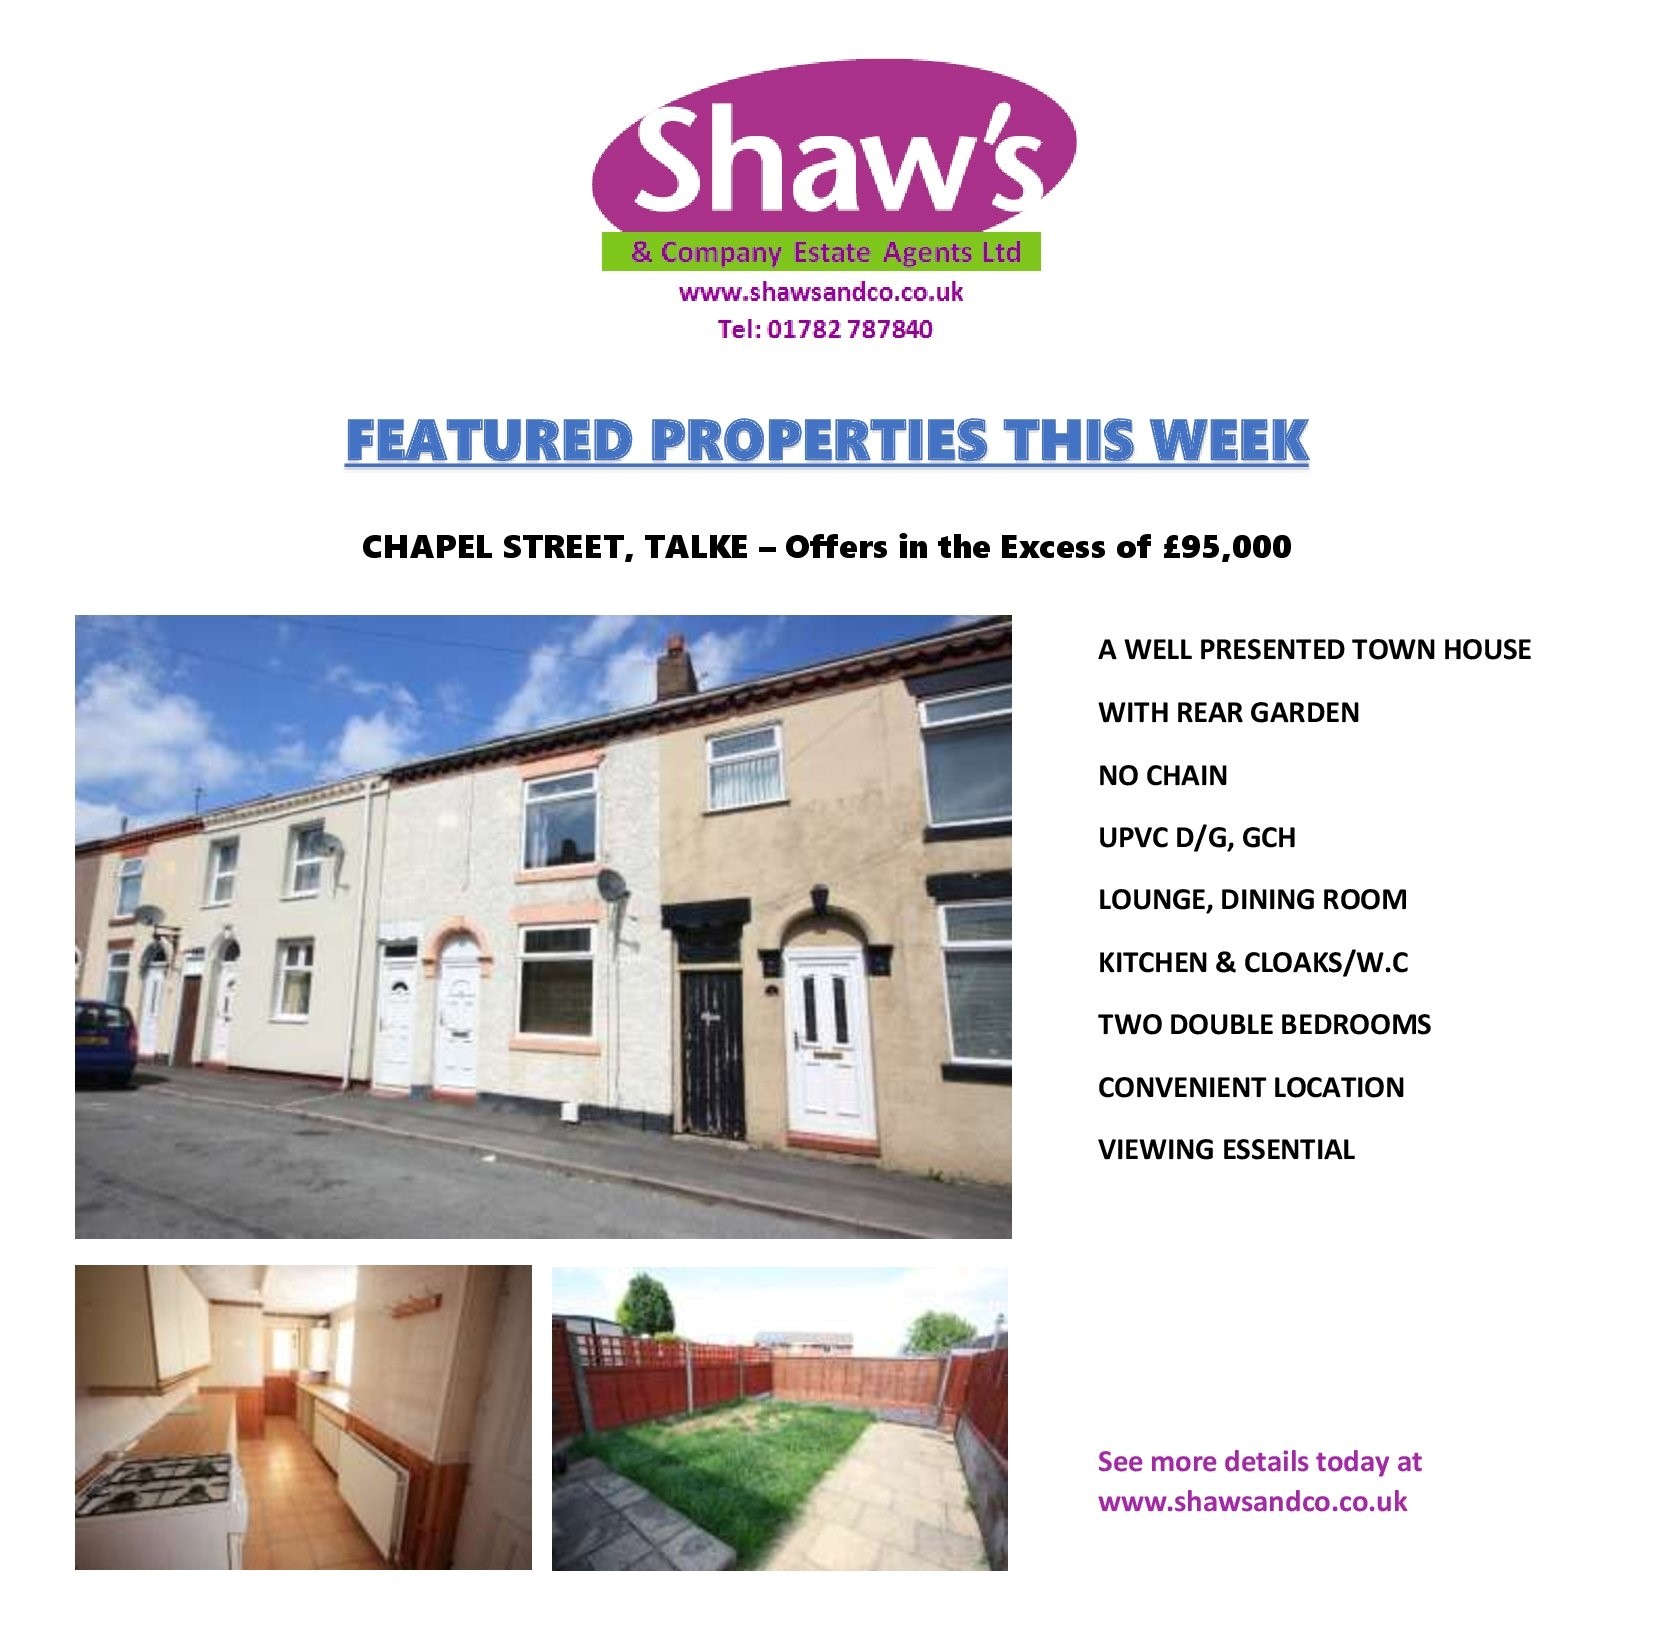 NEW & FEATURED PROPERTIES OF THE WEEK!